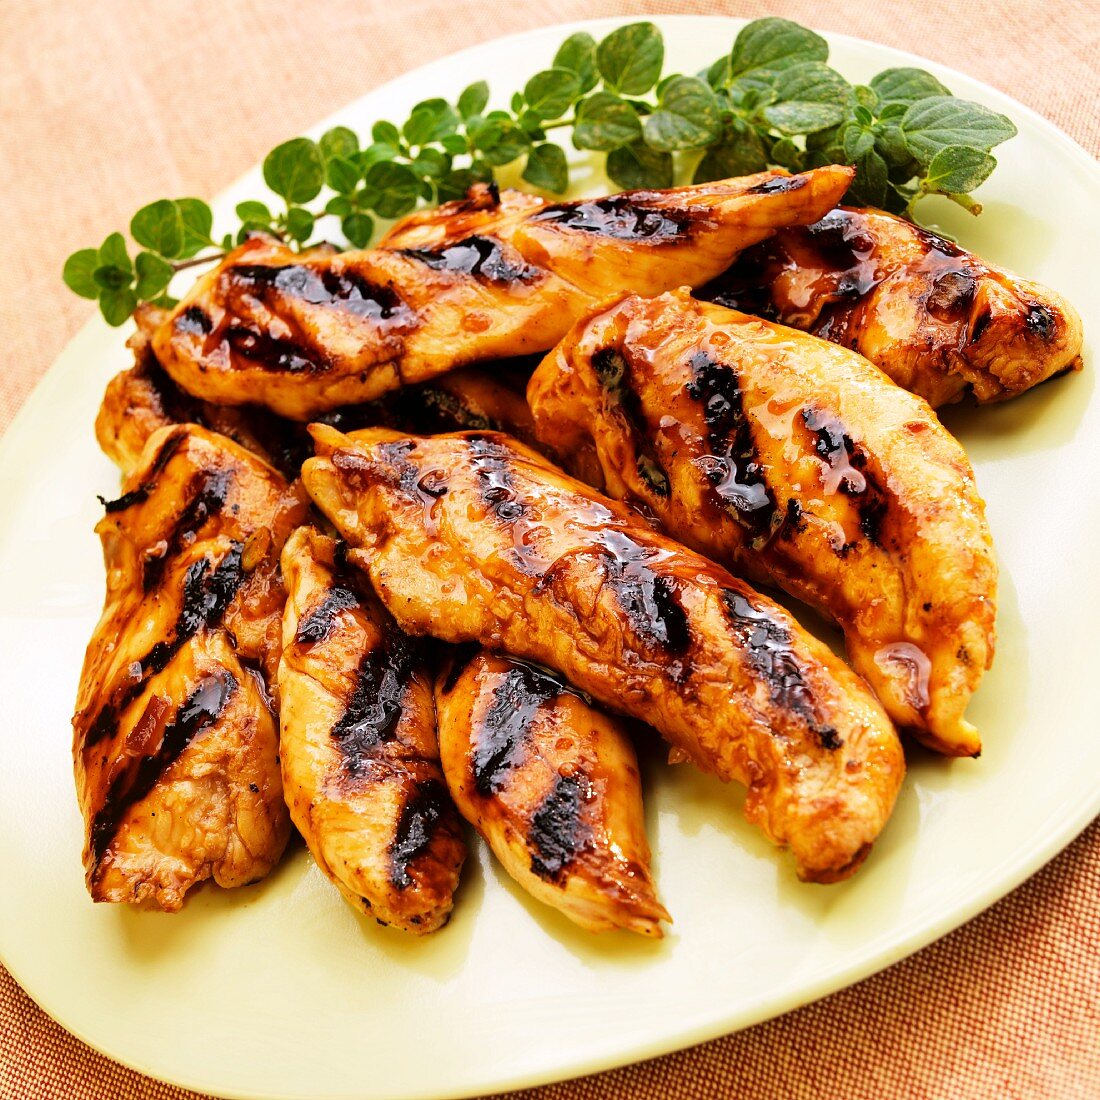 Grilled Chicken with Marmalade Glaze